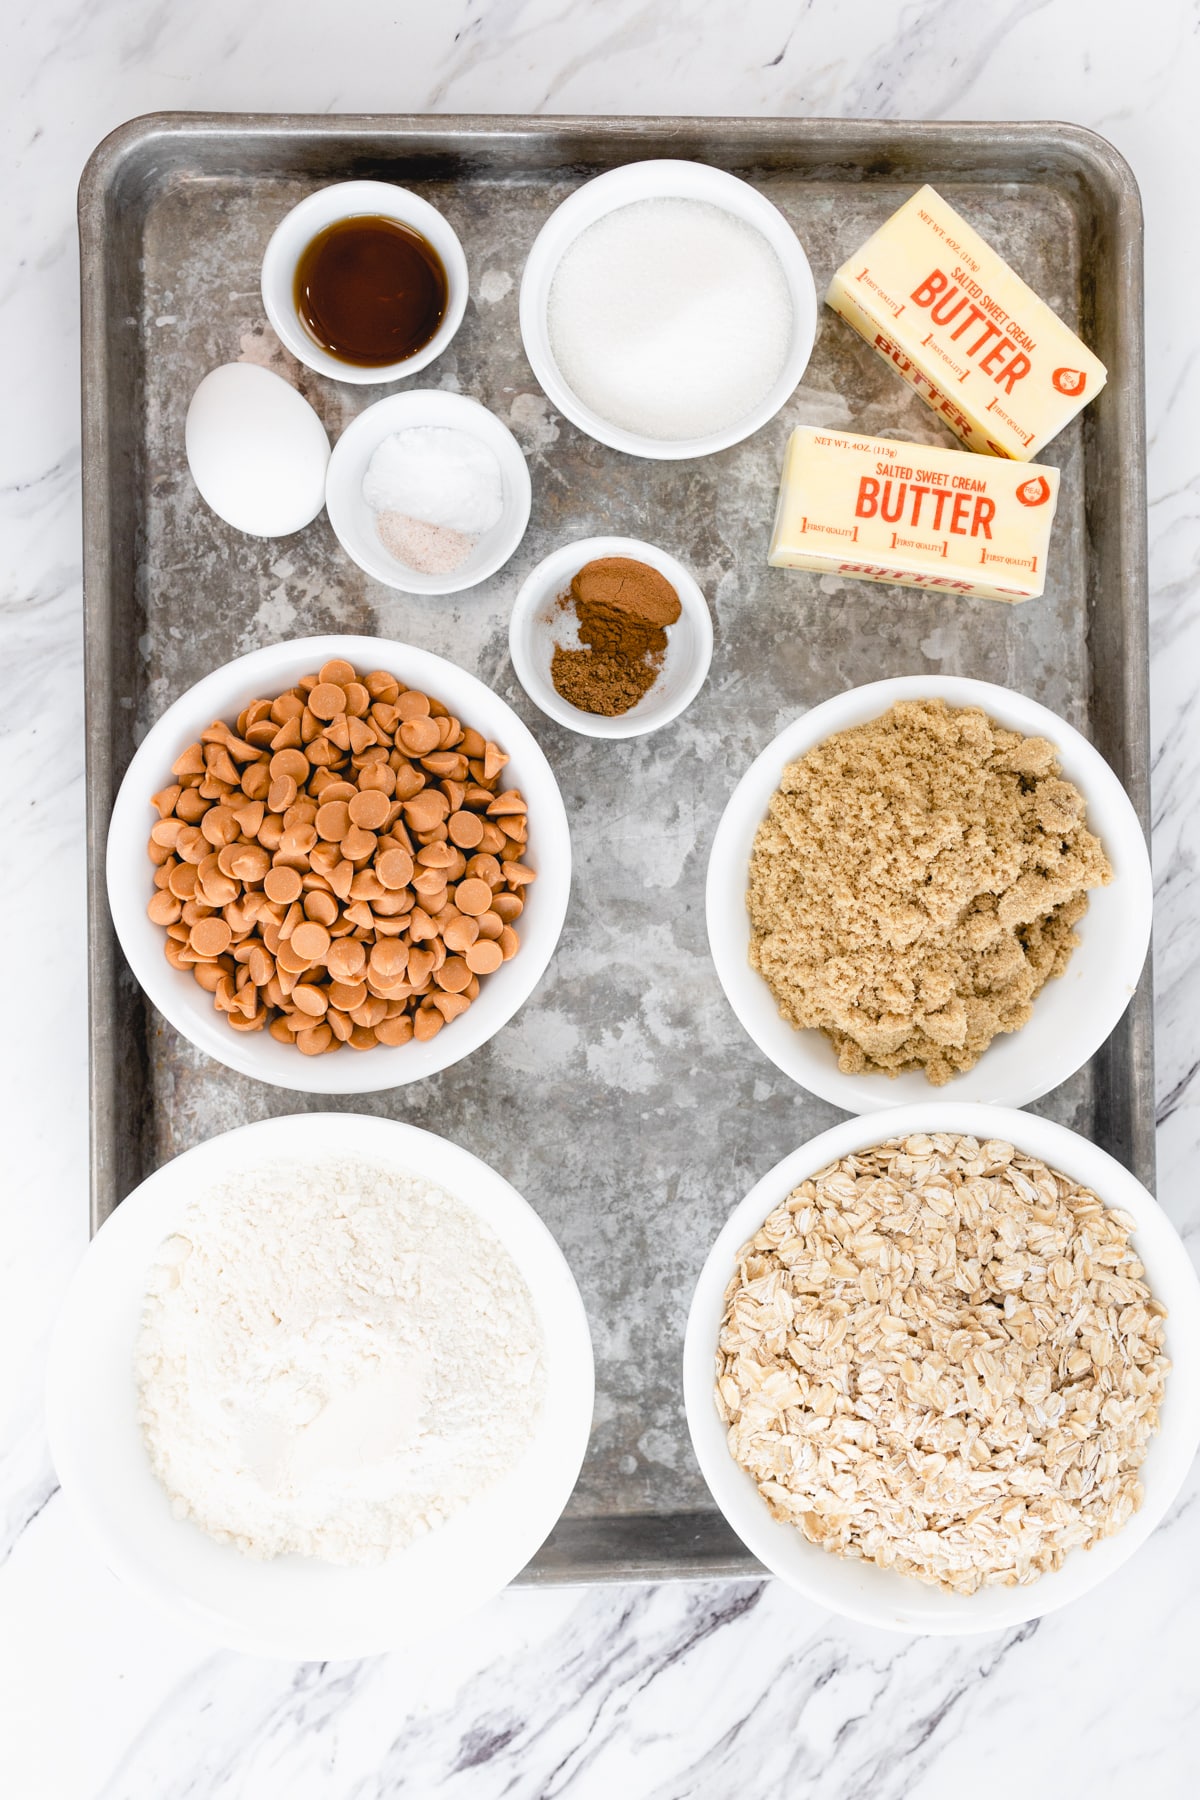 Top view of ingredients needed to make Oatmeal Butterscotch Cookies in small bowls on a baking tray.